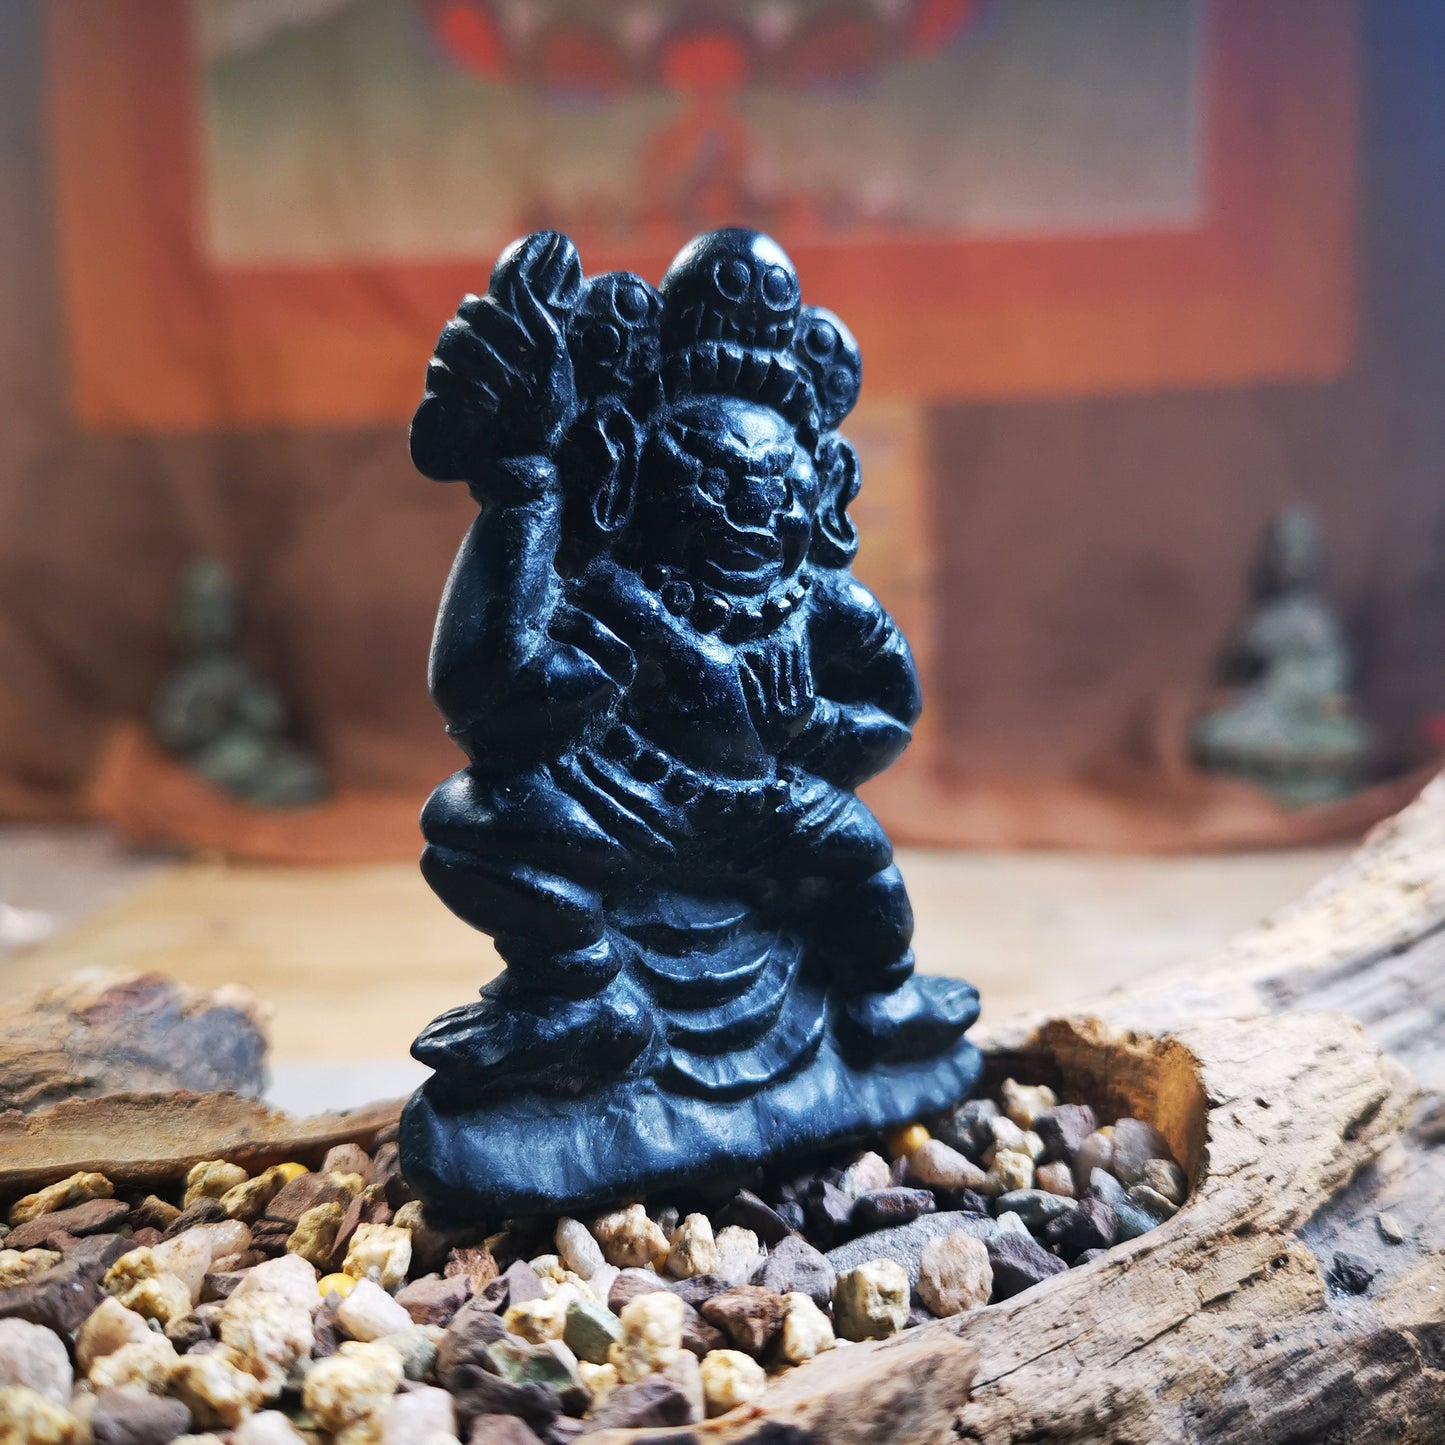 Gandhanra Hand carved Stone Vajrapani,Tibetan Buddhism Statue,the Protector and Guide of Gautama Buddha,Made of Obsidian